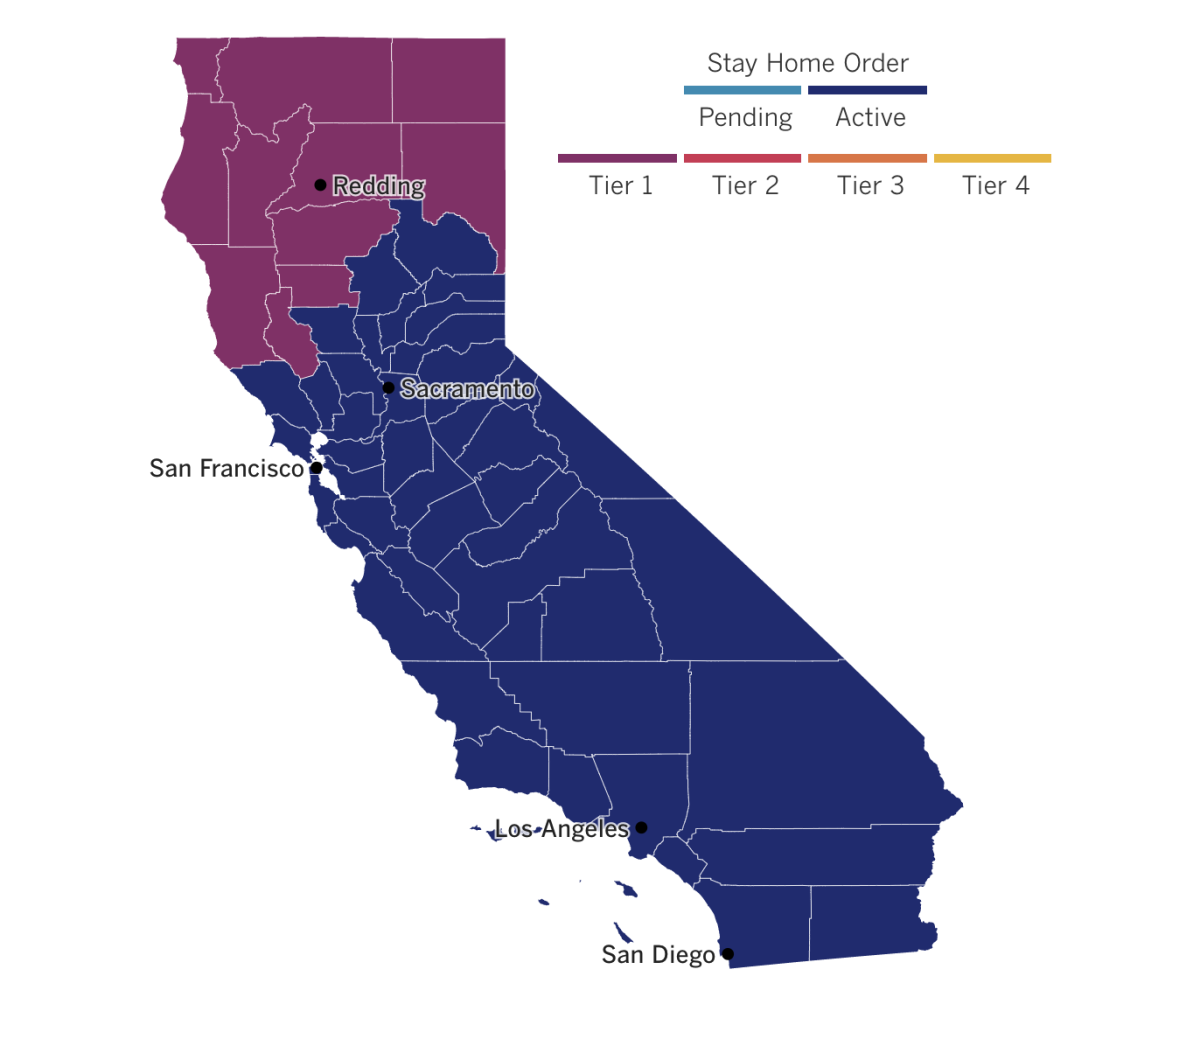 A map showing most of California under stay-at-home order due to low ICU capacity and some northern counties still in Tier 1.